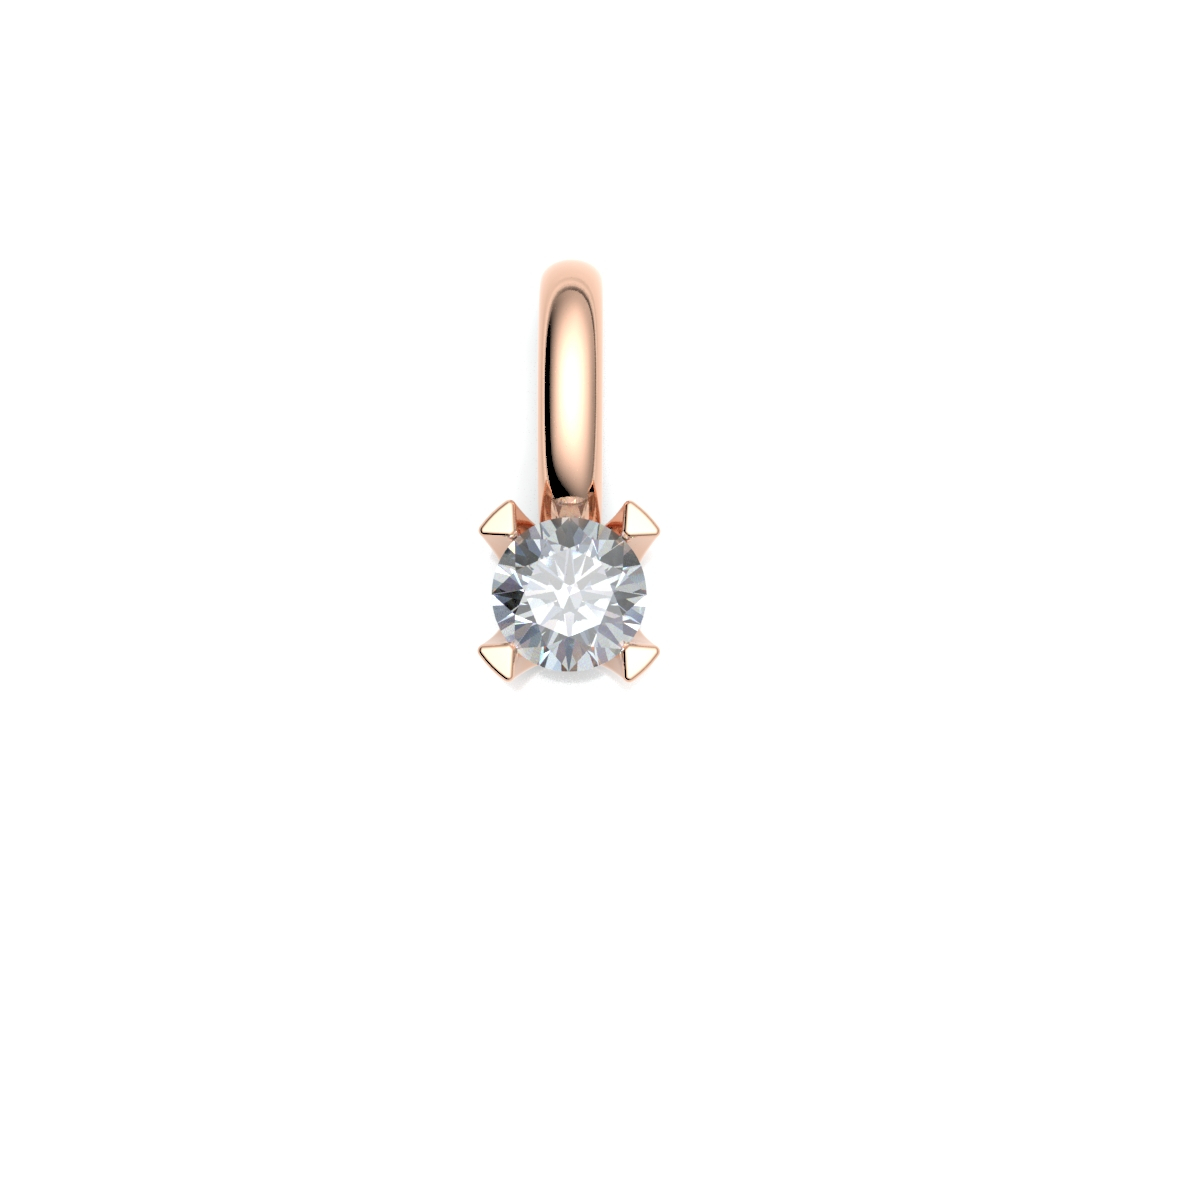 212798-4034-001 | Anhänger Freiberg 212798 375 Rotgold Brillant 0,150 ct H-SI ∅ 3.4mm100% Made in Germany  